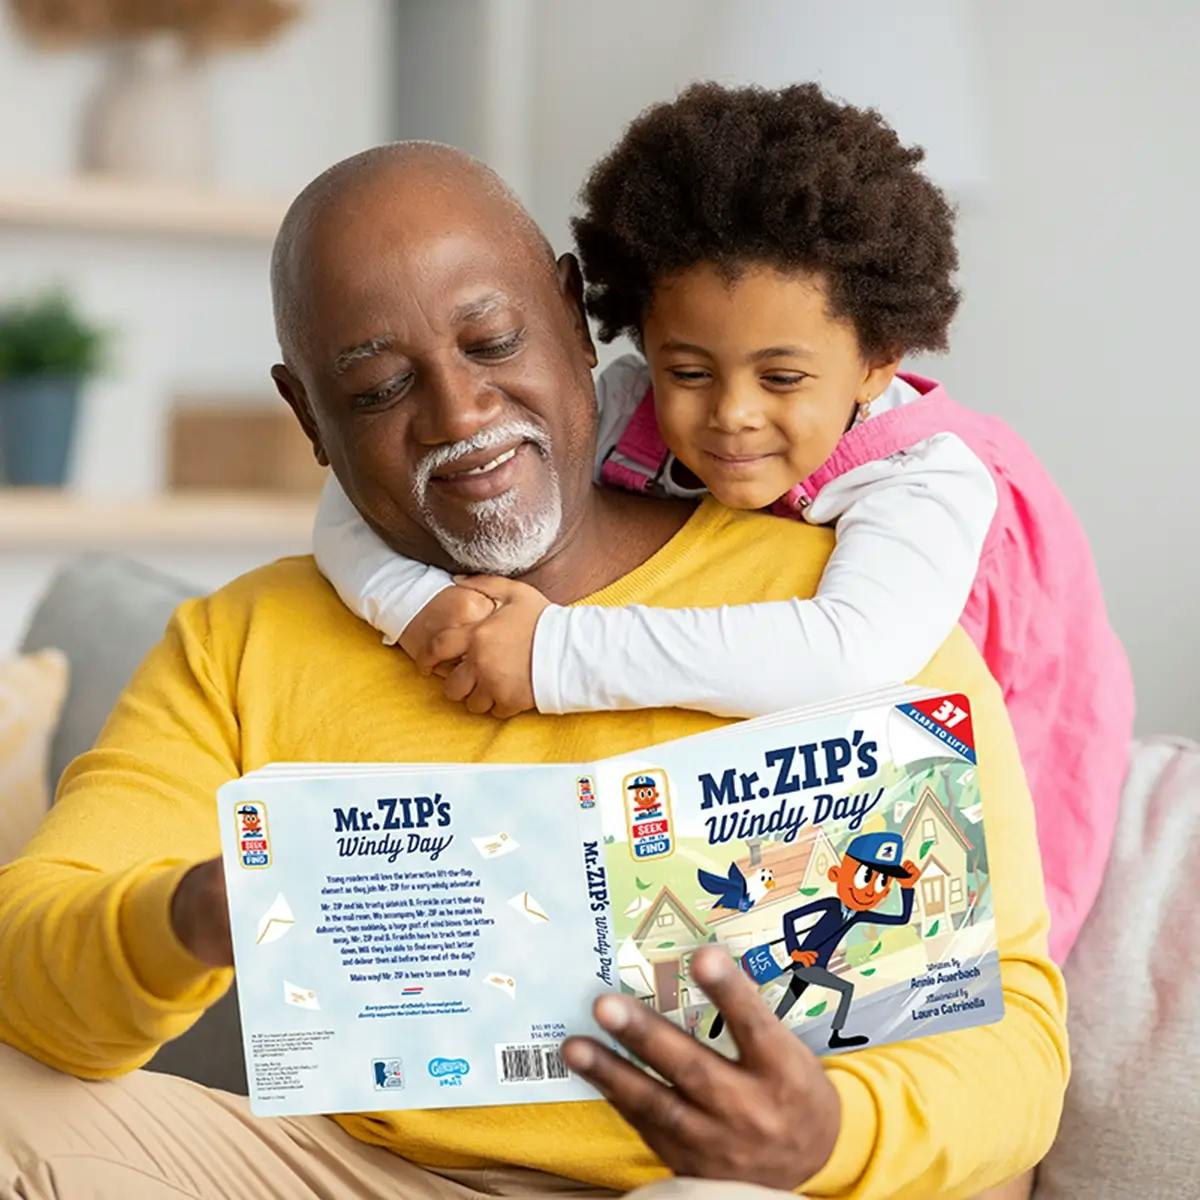 African American man reading “Mr. ZIP’s Windy Day” to his granddaughter.